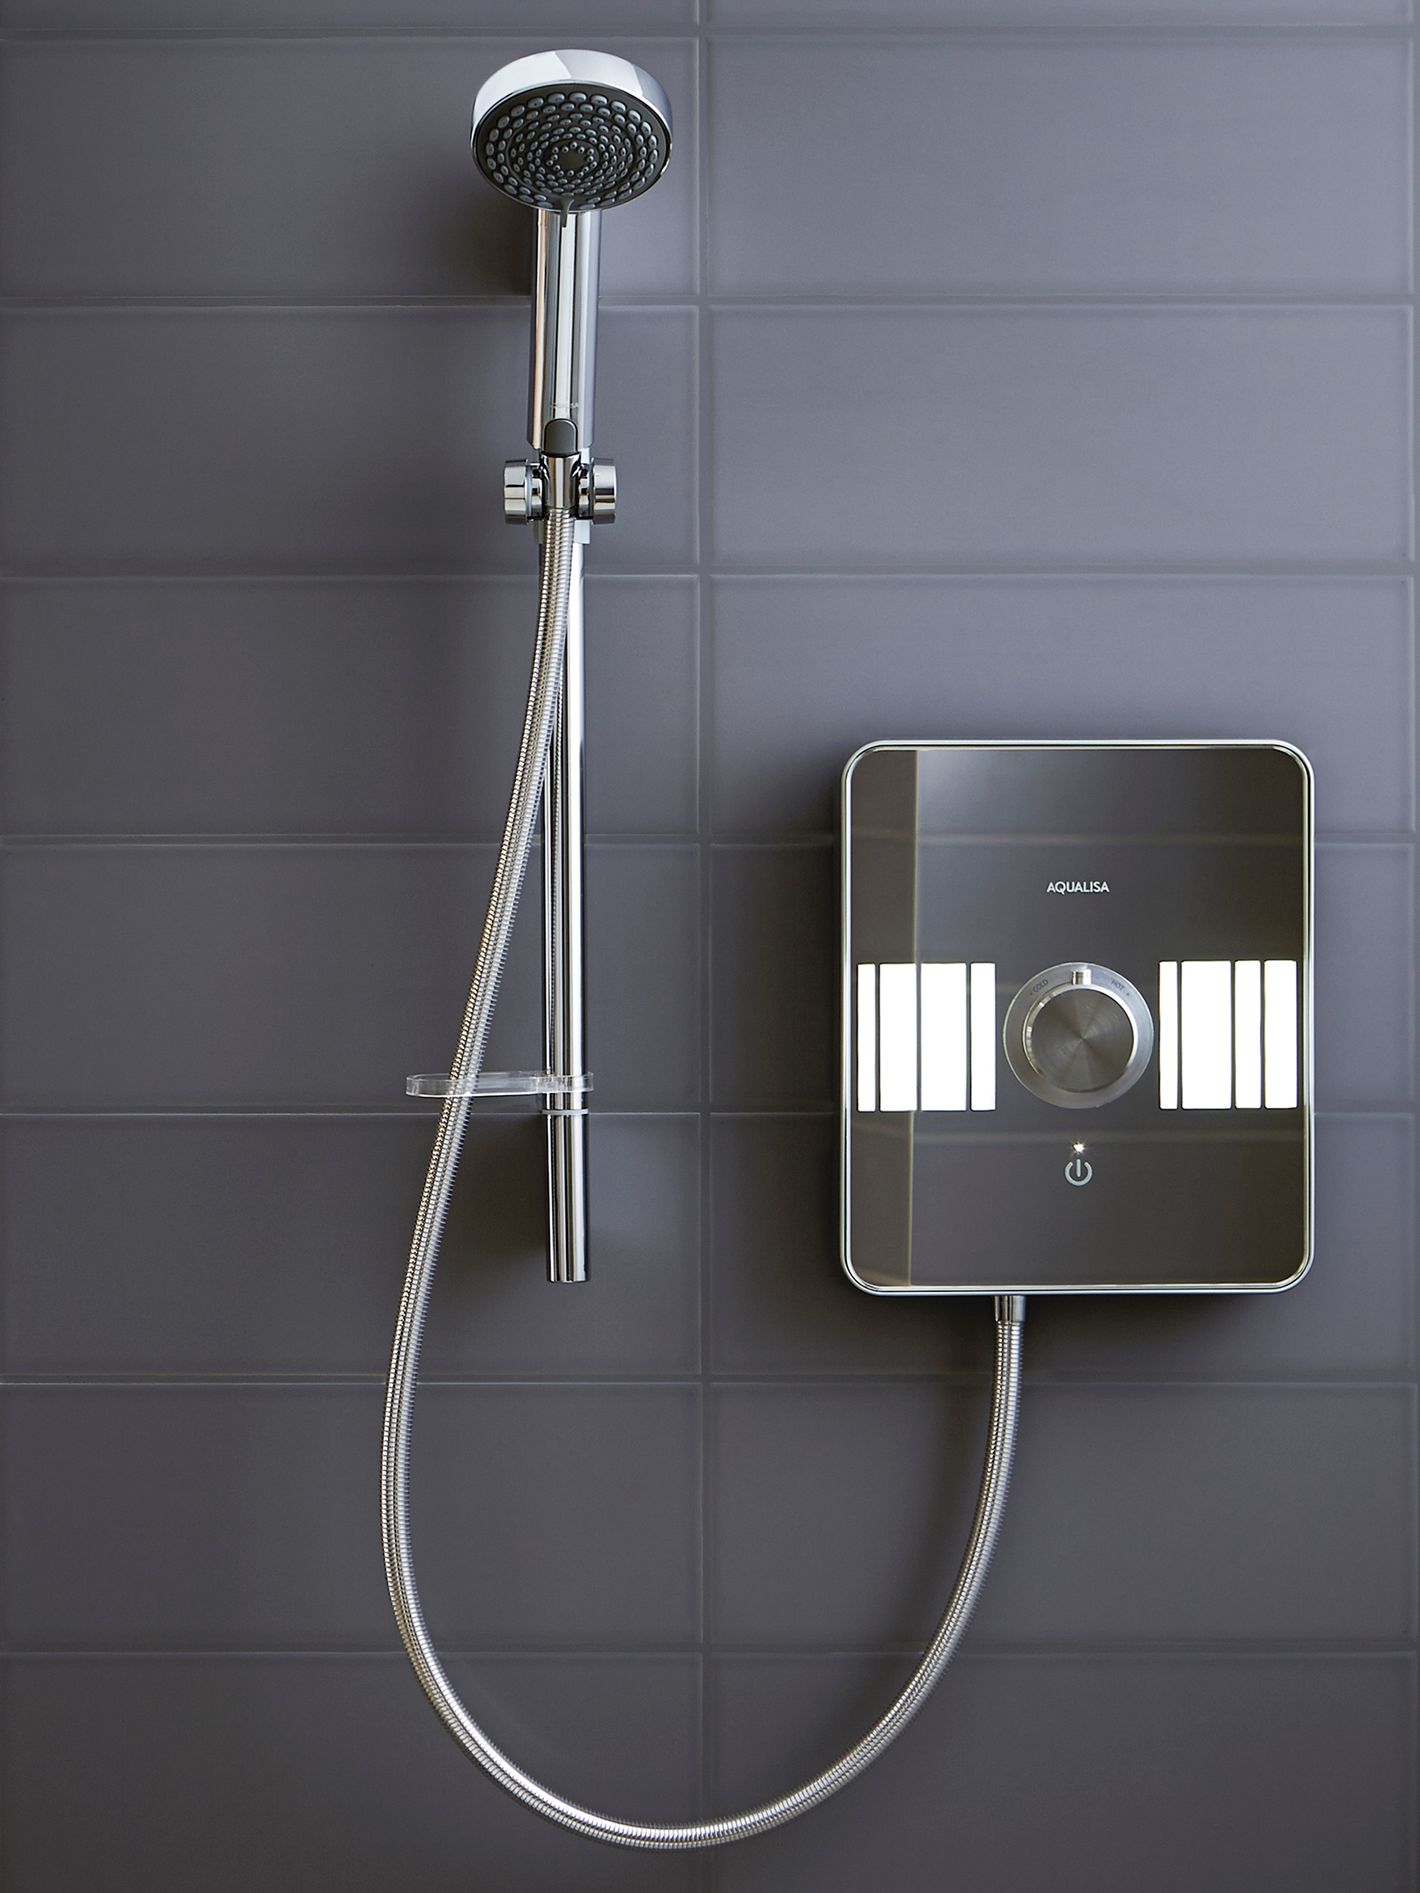 Aqualisa Lumi XT 8.5kW Electric Shower with Adjustable Head, Chrome at John Lewis & Partners